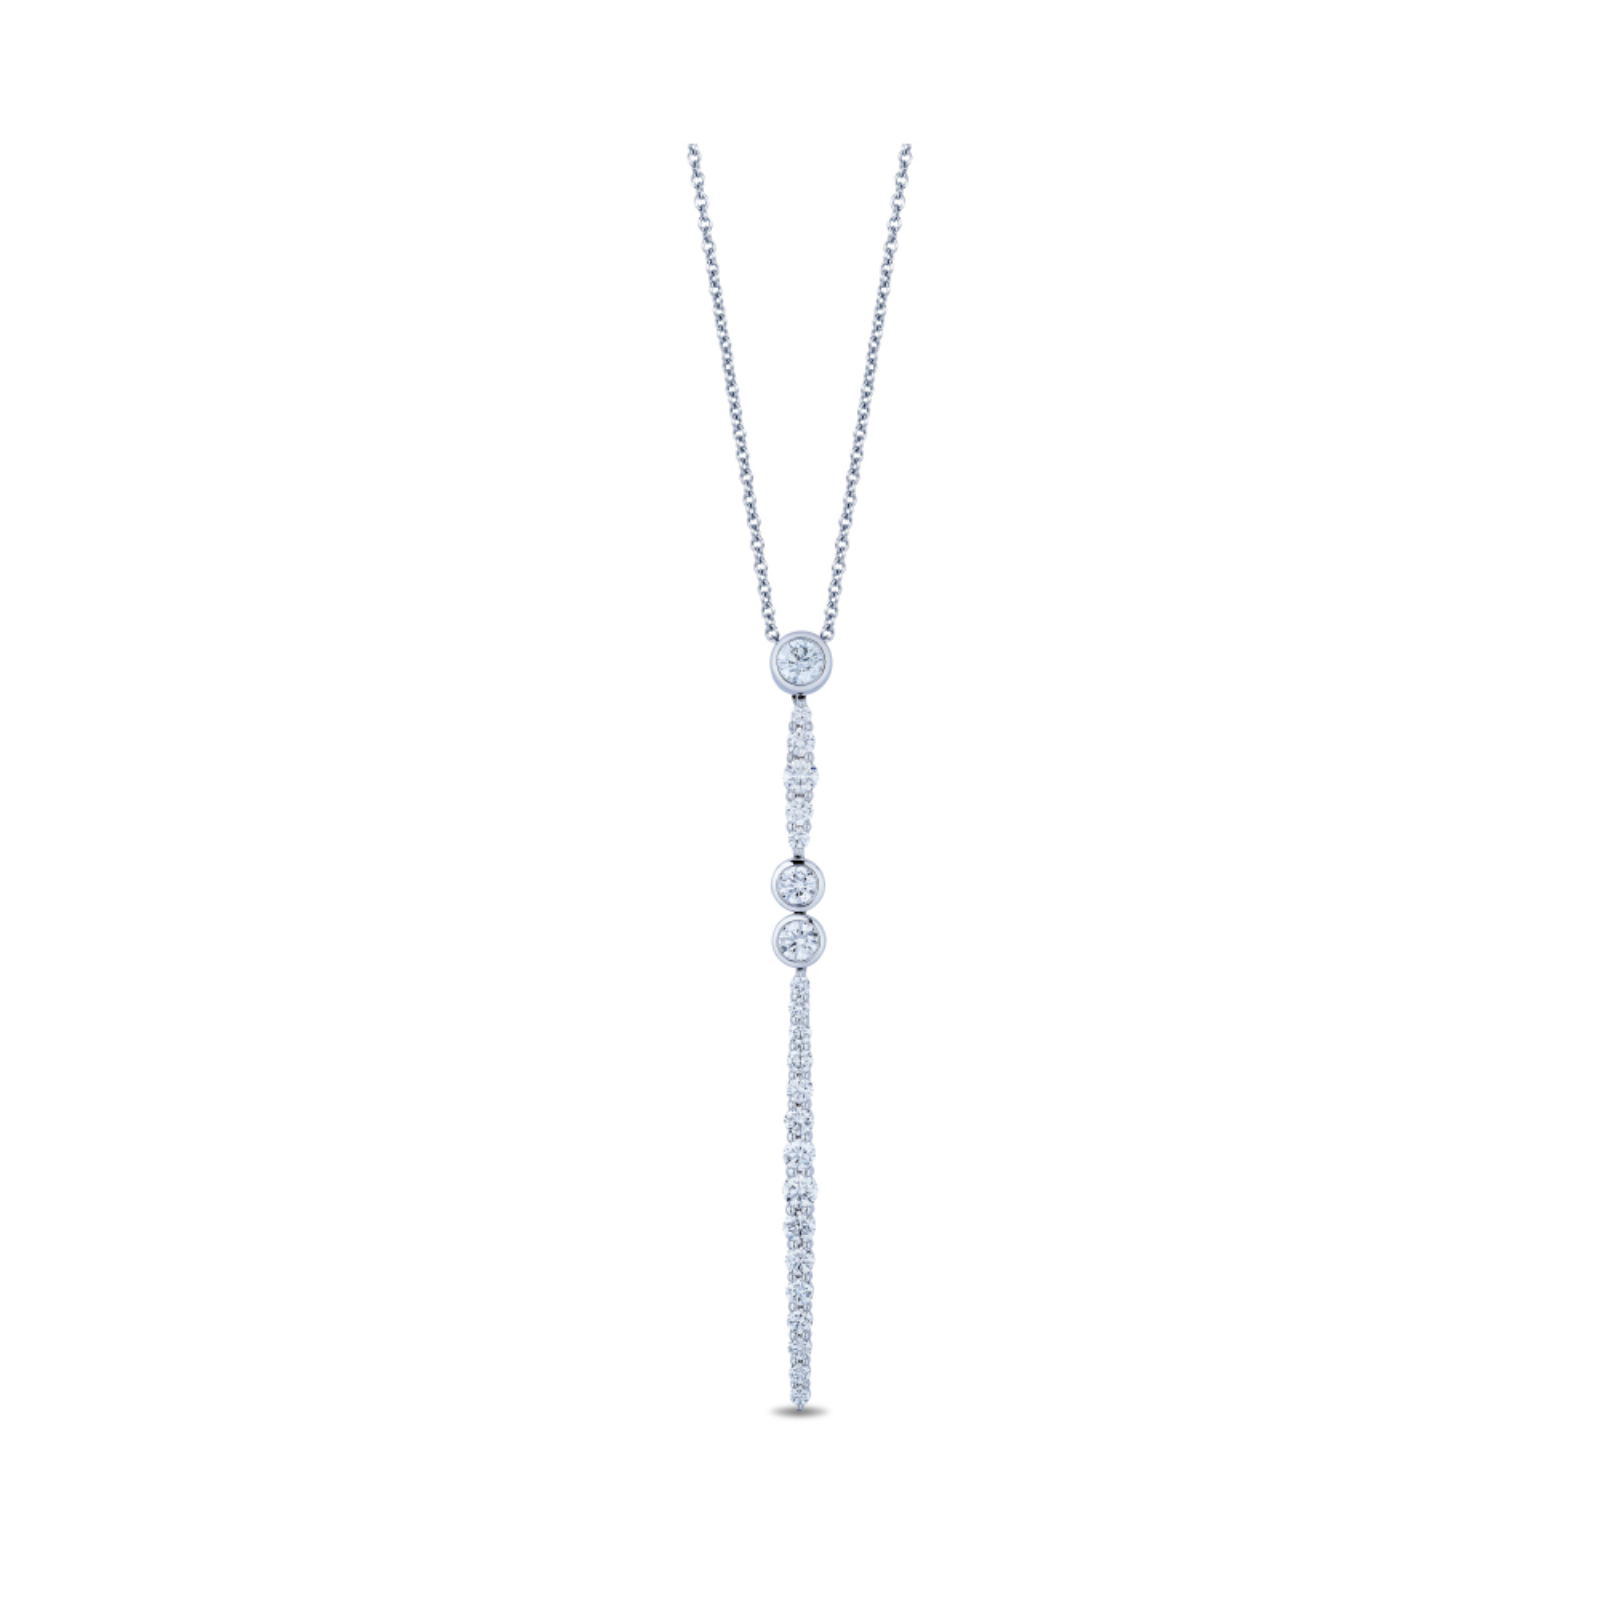 White Gold and Diamond Drop Necklace